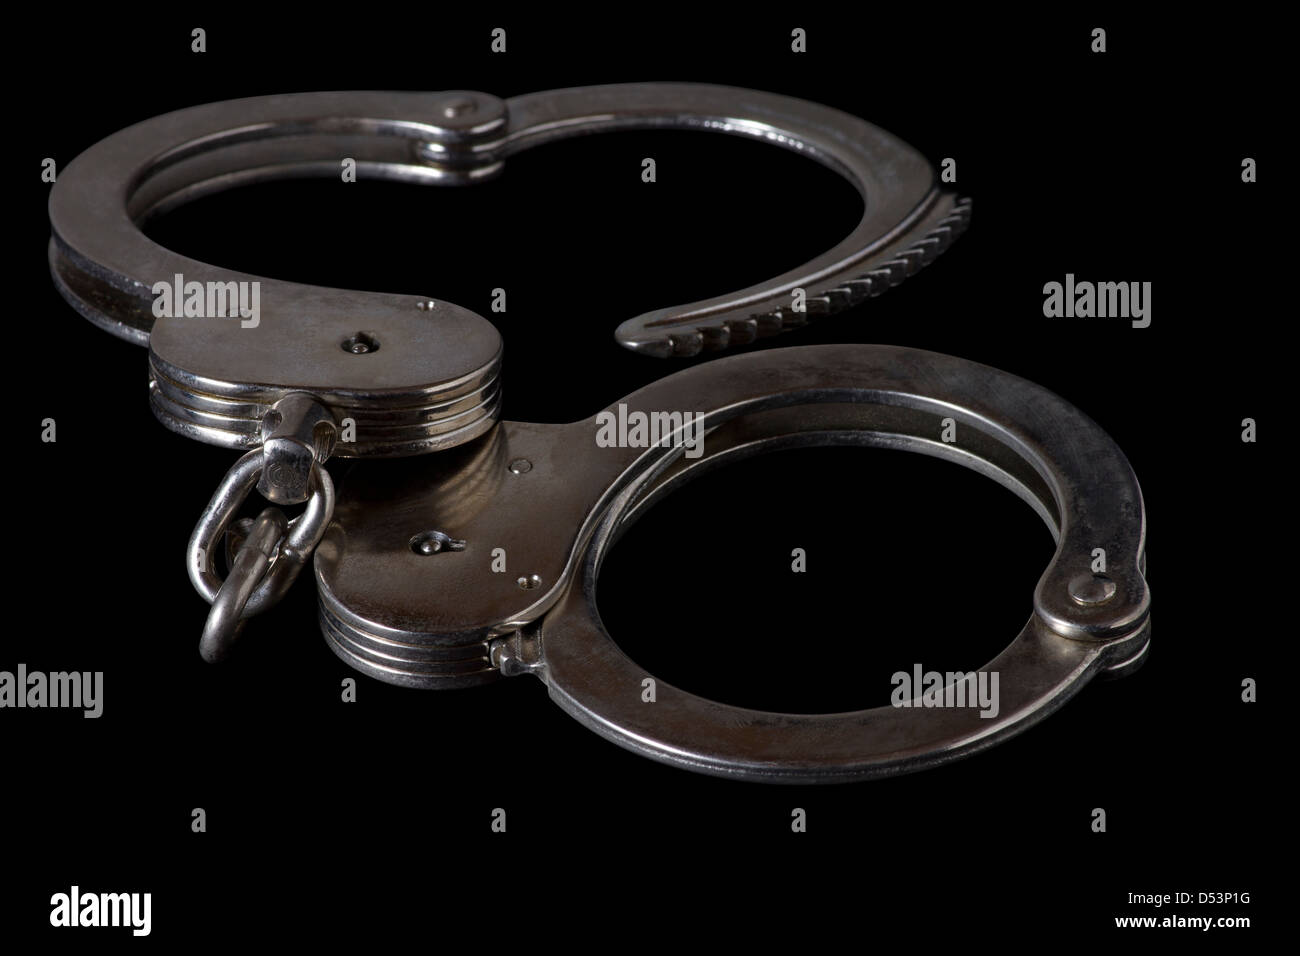 handcuffs,Metallic handcuffs,Isolated on black background Stock Photo